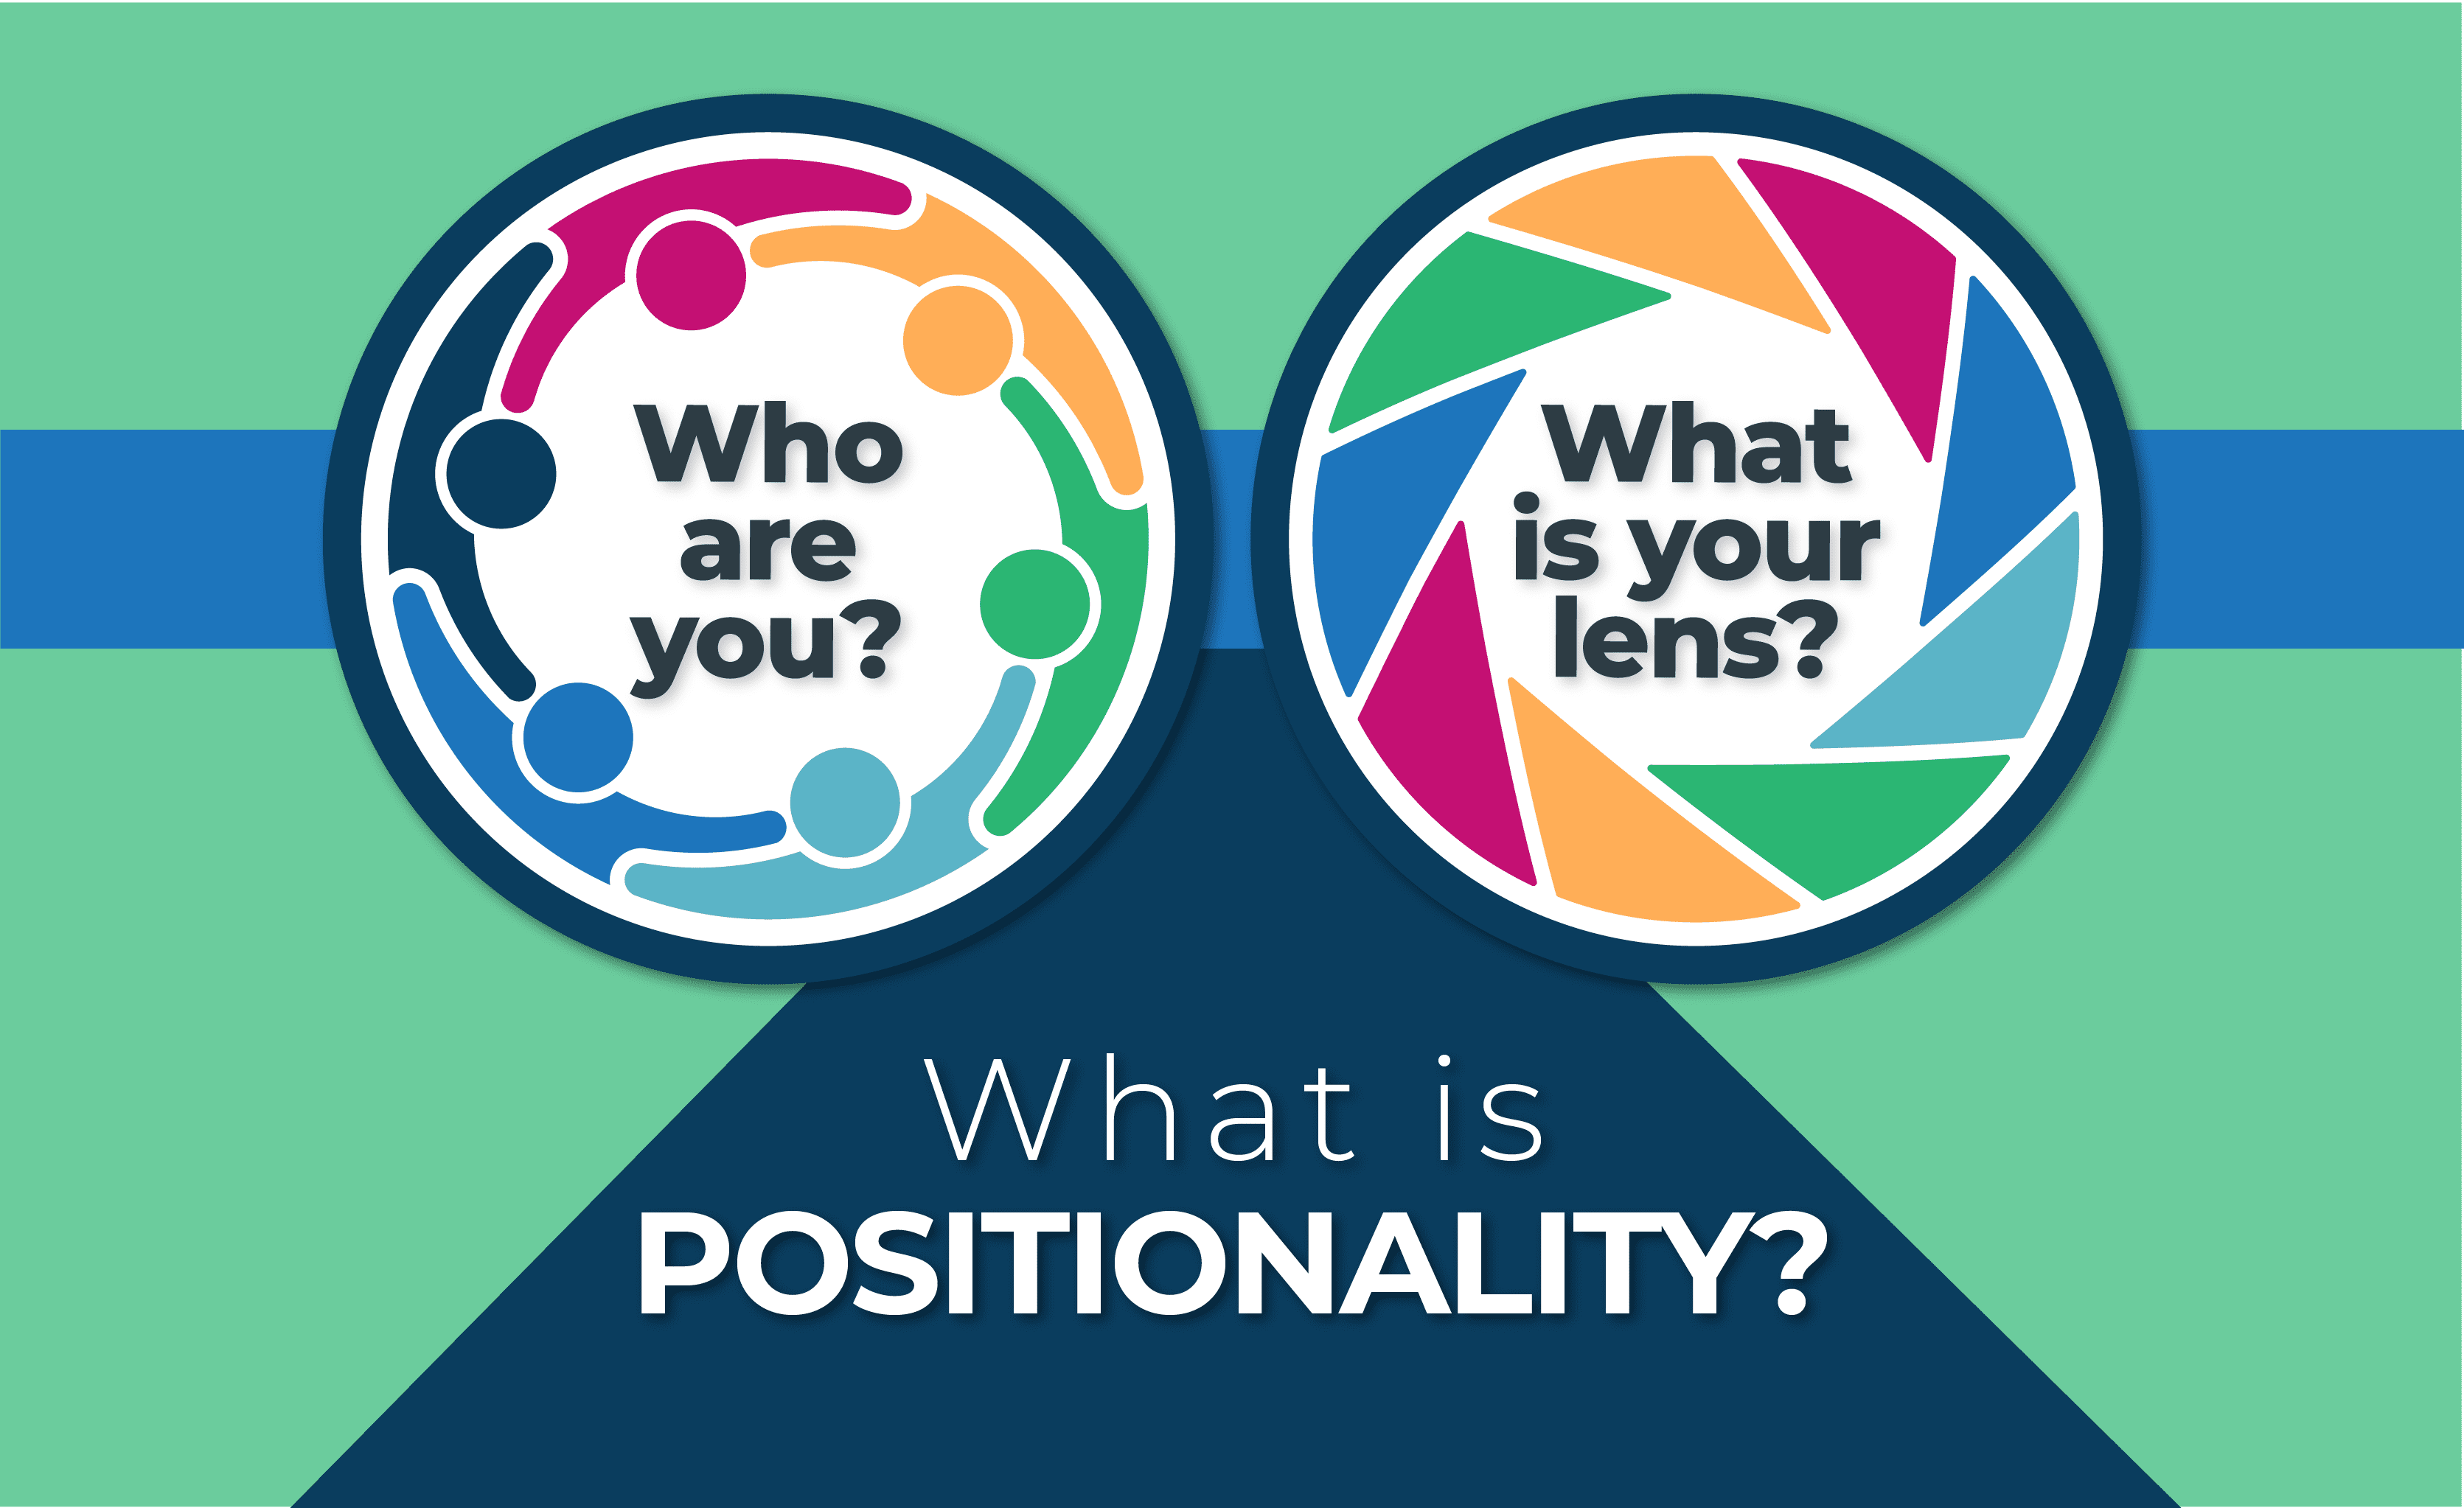 What is positionality? Free download on how to write a positionality statement